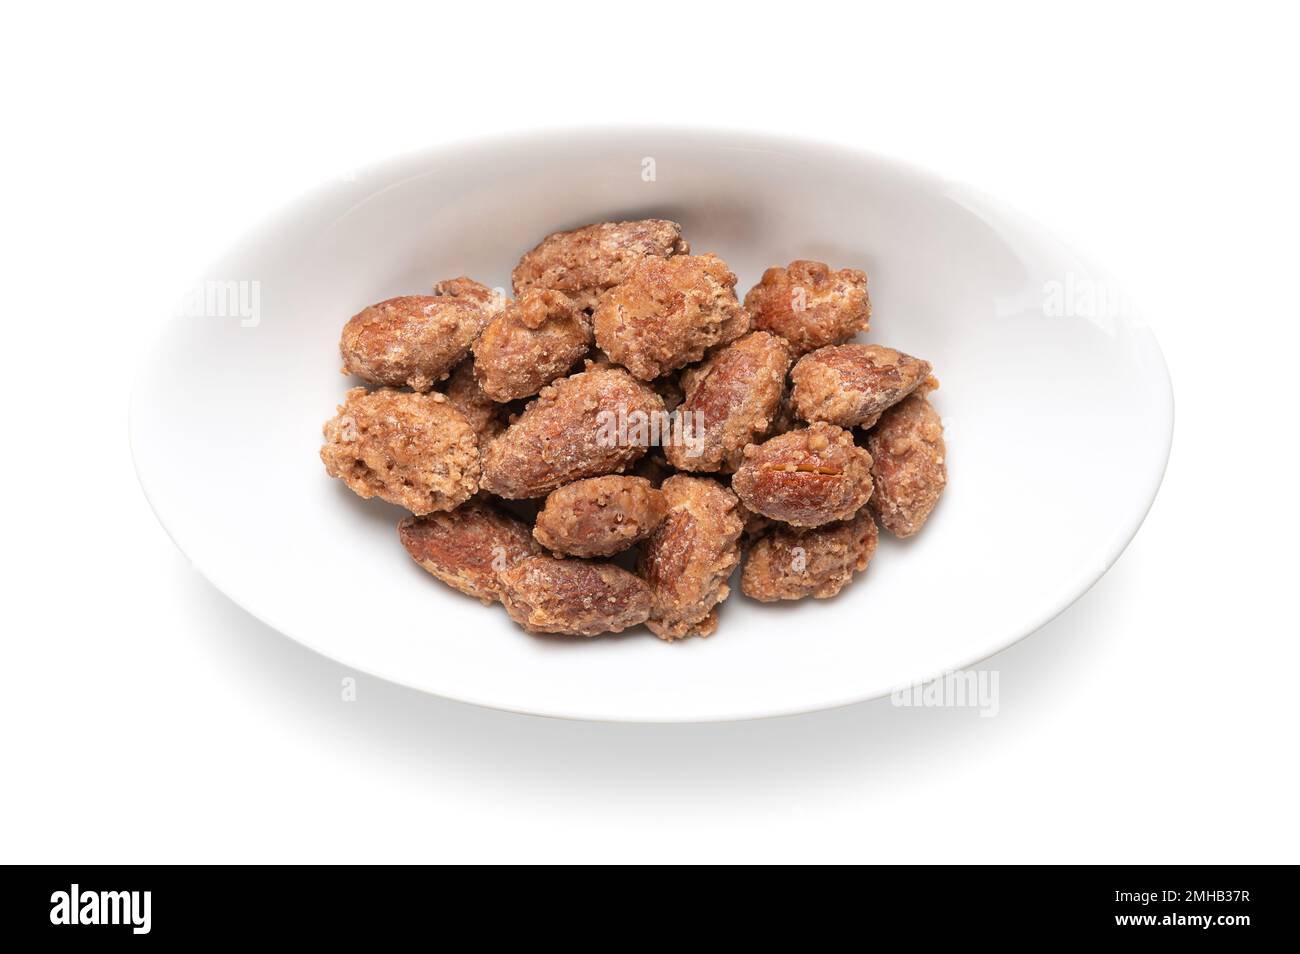 Candied almonds in an oval white bowl. Homemade, in a special way cooked almonds, whole nuts coated in crunchy sugar. Sold at Christmas markets. Stock Photo